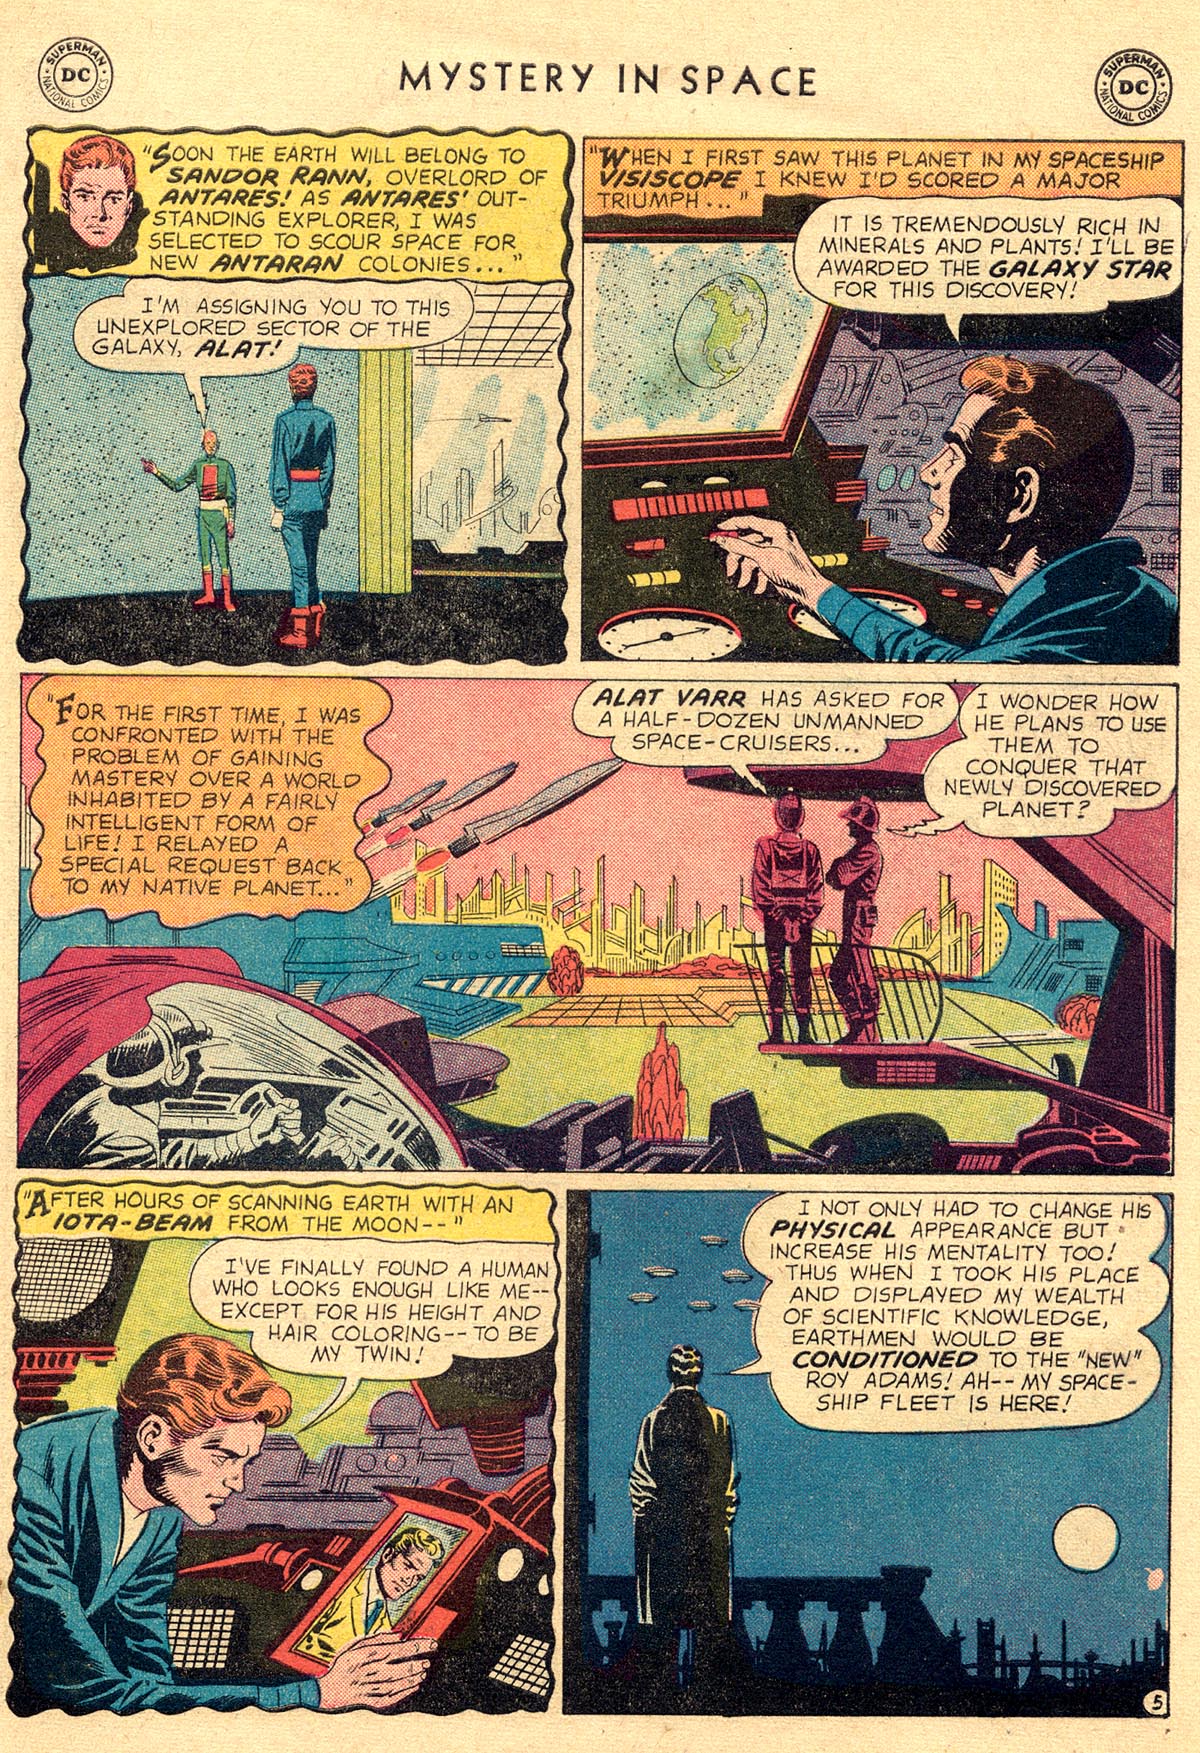 Mystery in Space (1951) 46 Page 6